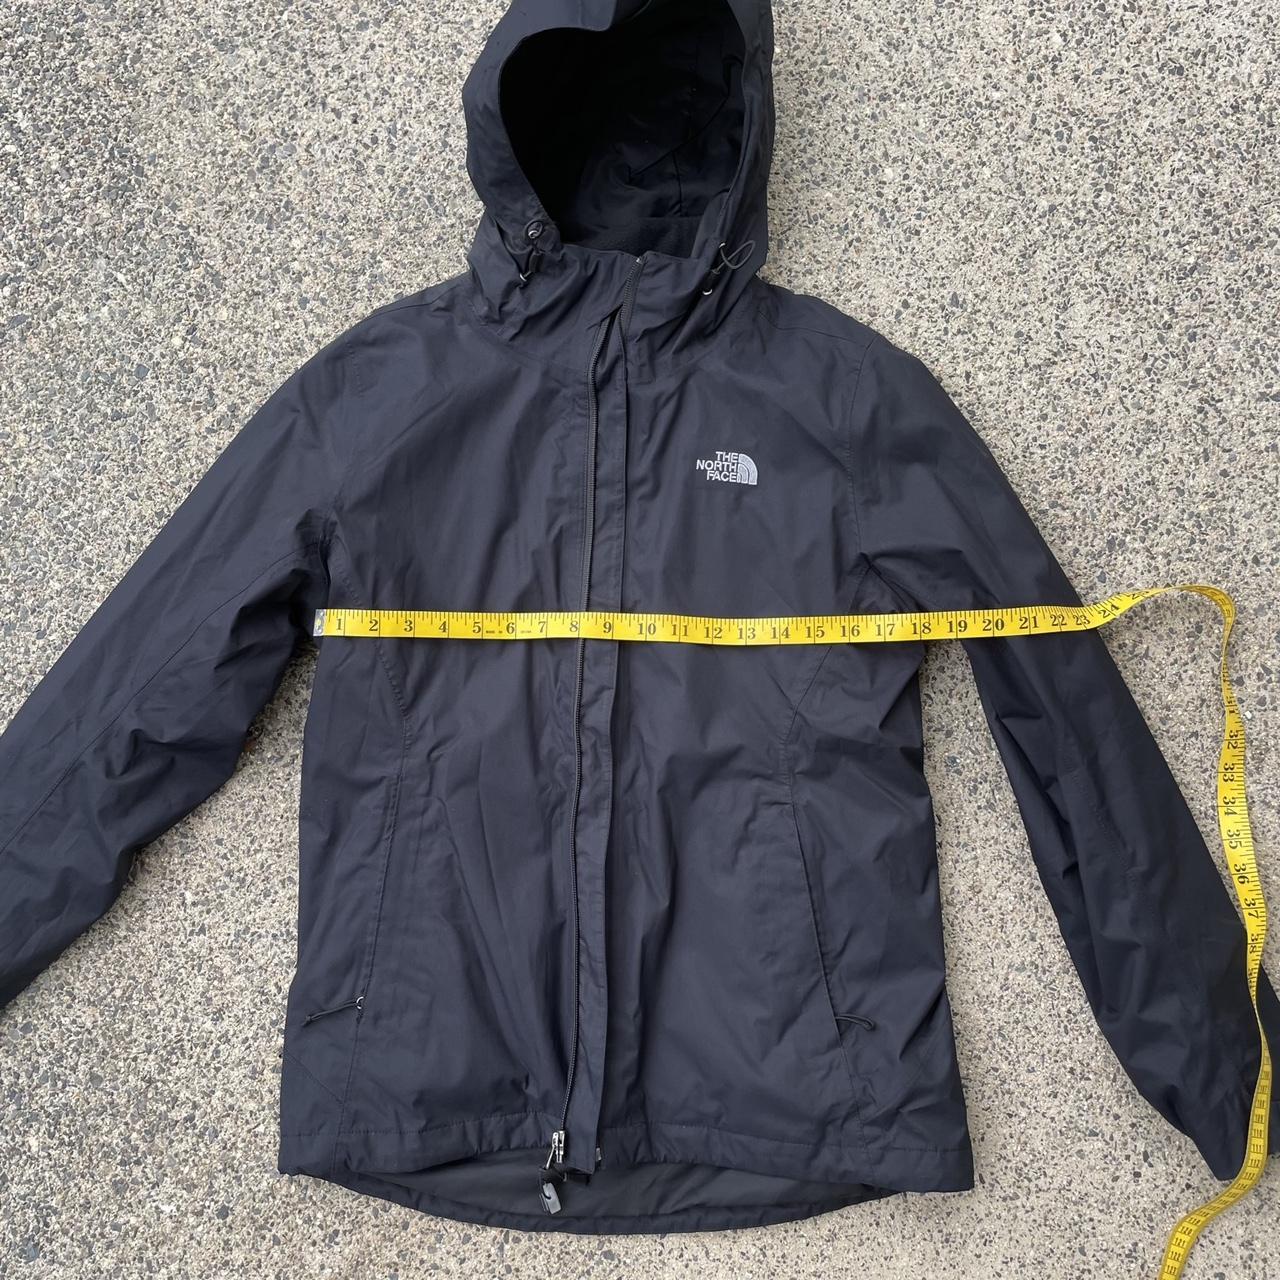 The North Face Women's Black Jacket (2)